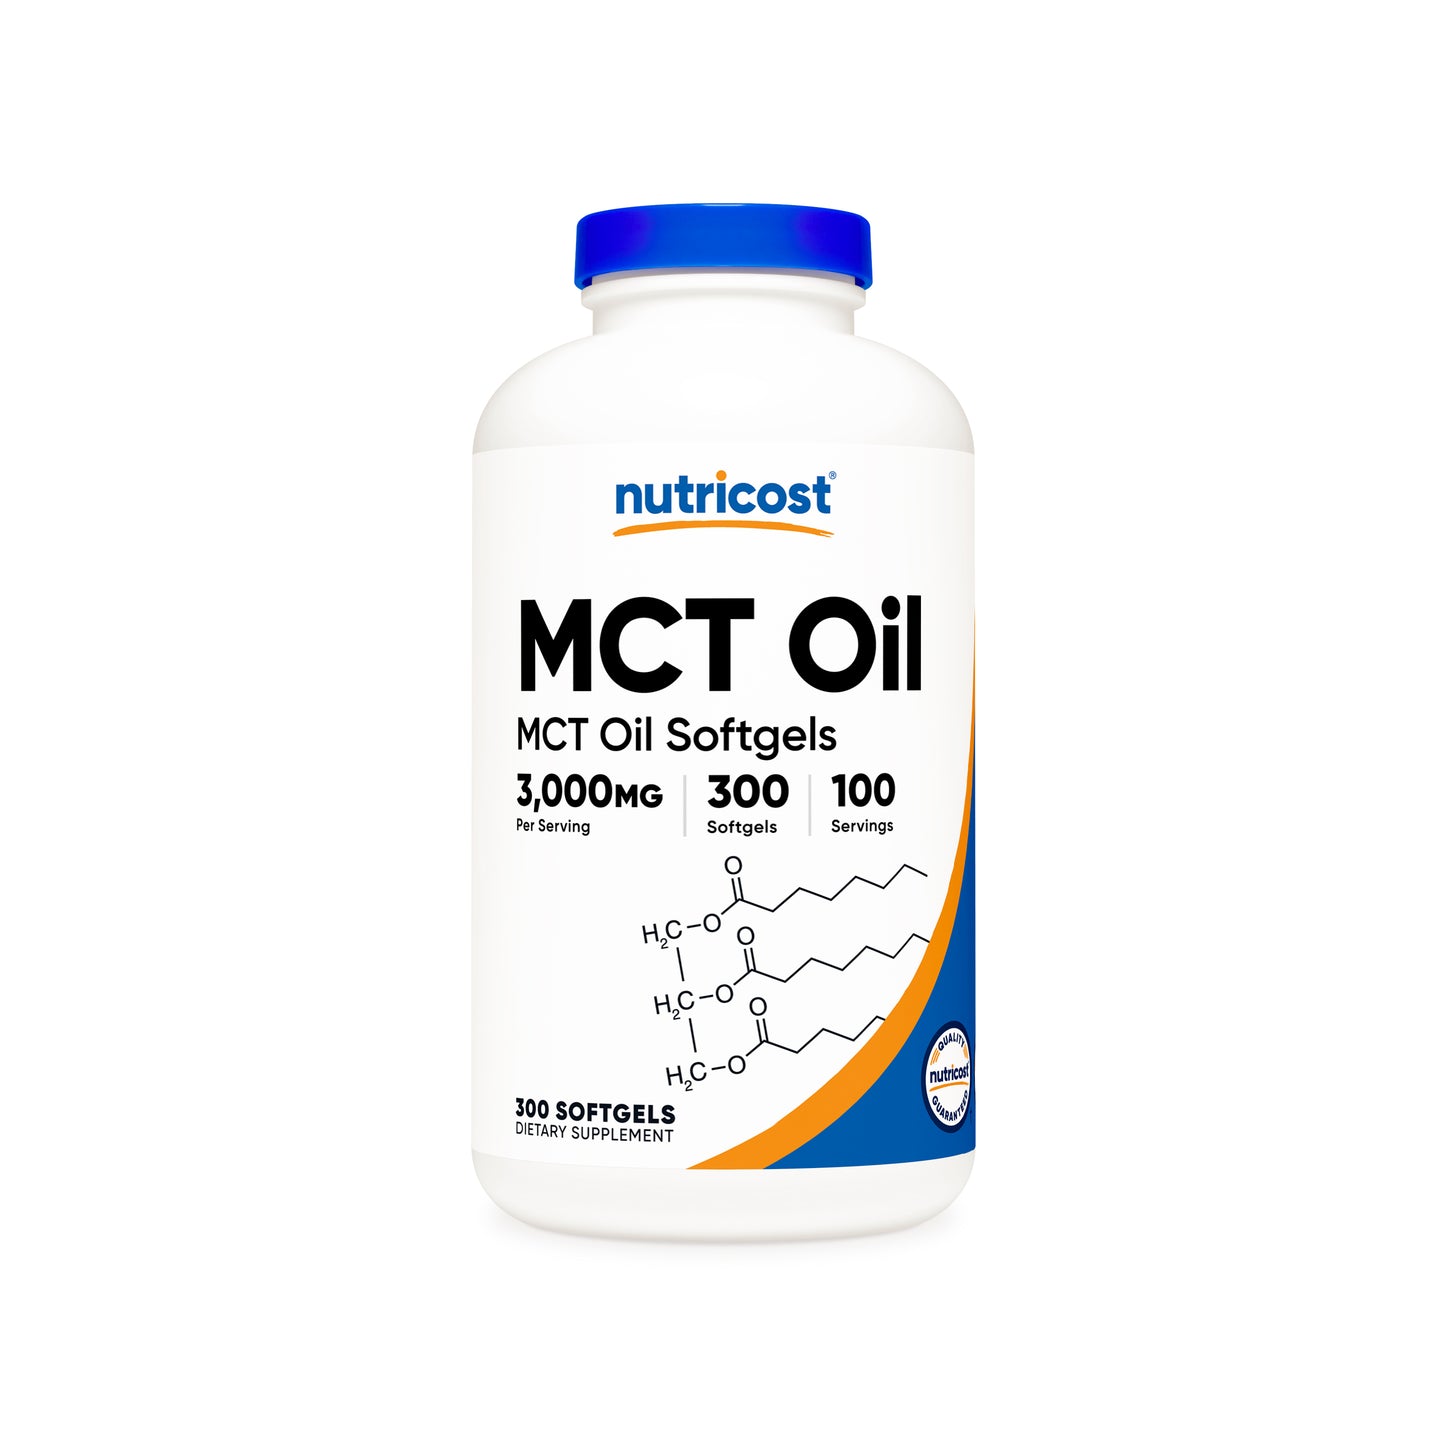 Nutricost MCT Oil Softgels